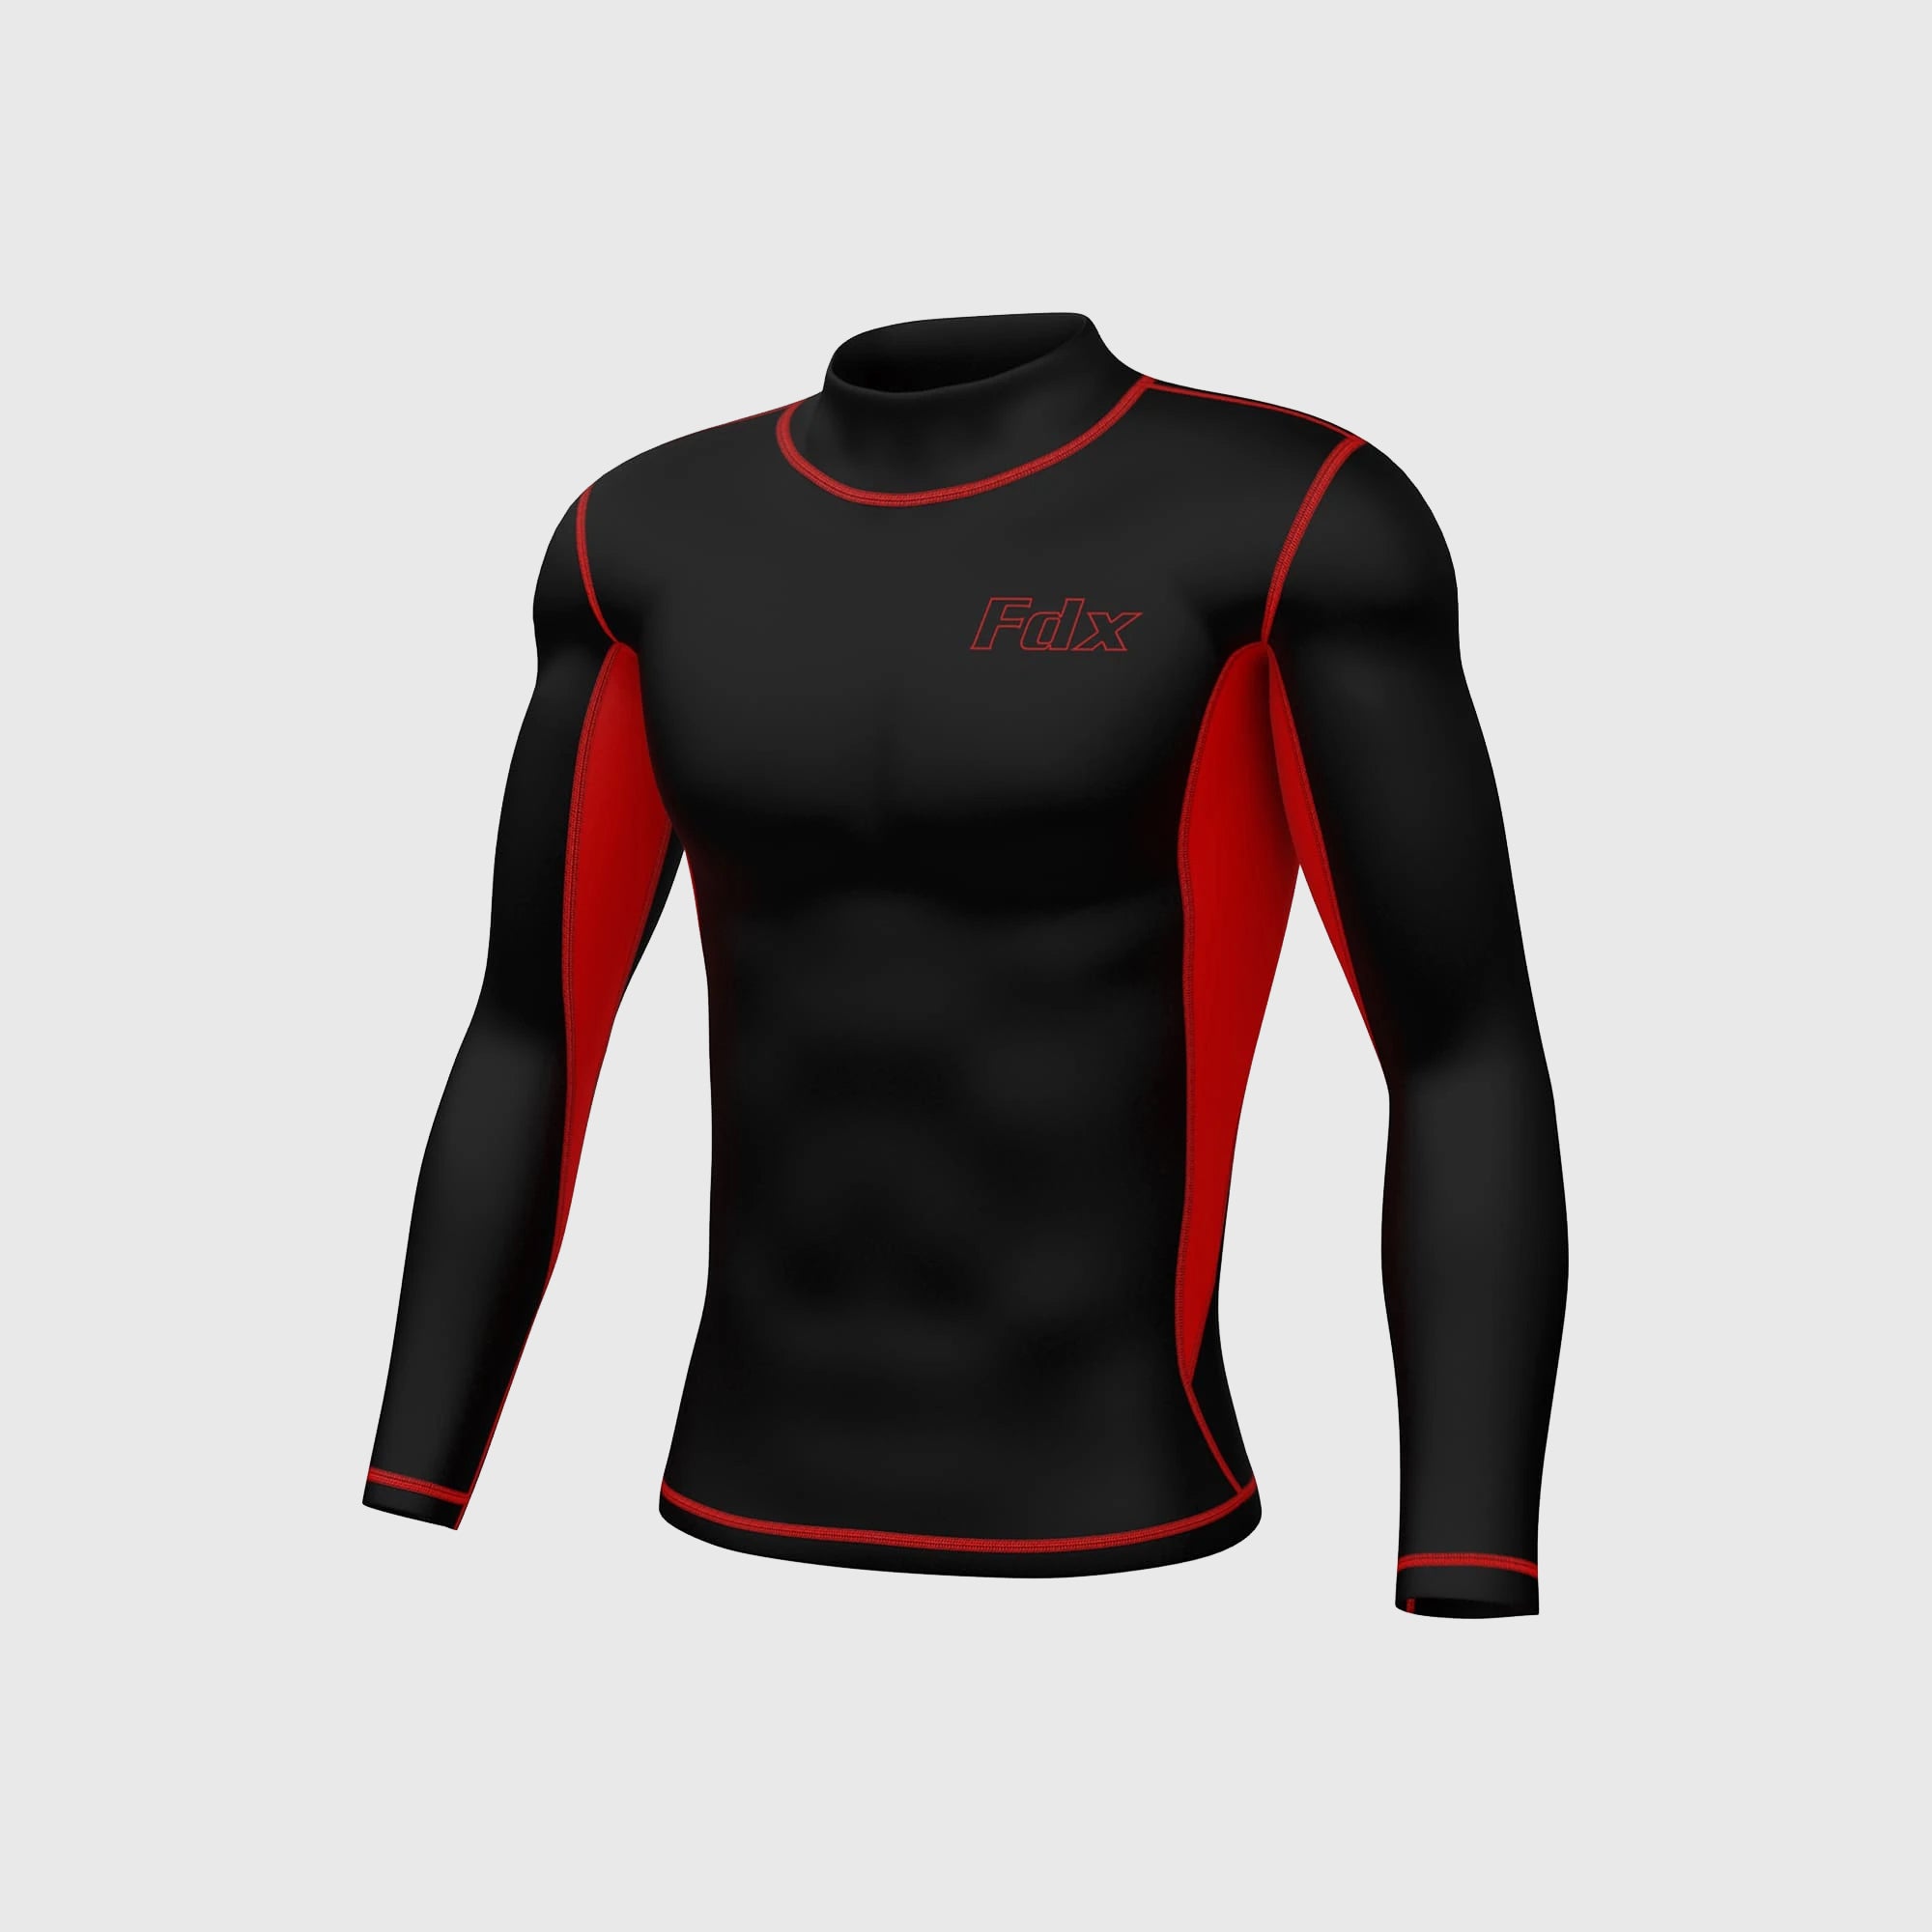 Fdx Mens Black & Red Long Sleeve Compression Top Running Gym Workout Wear Rash Guard Stretchable Breathable - Inorex